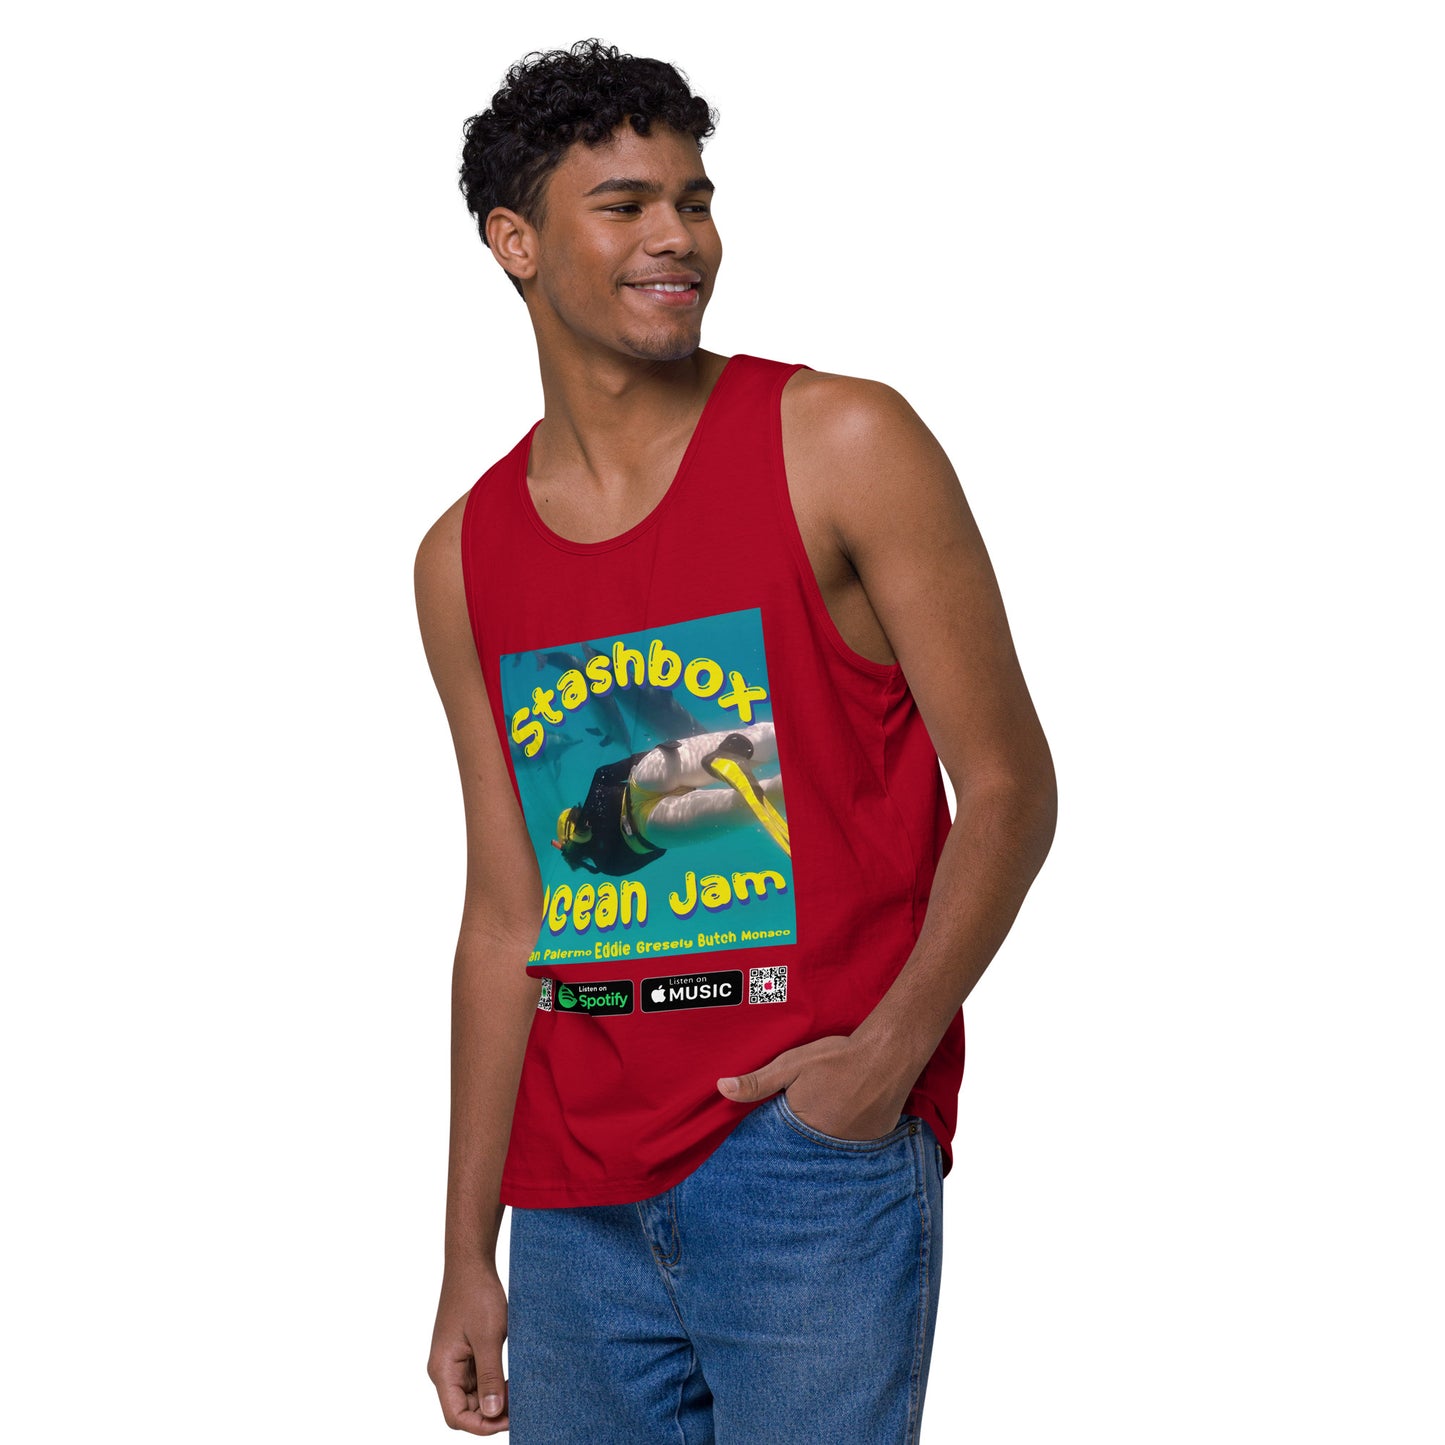 Dive into musical vibes with our Ocean Jam Men’s Premium Tank Top, Design #017. Your fashion, your gateway to musical expression, exclusively at Stashbox.ai.